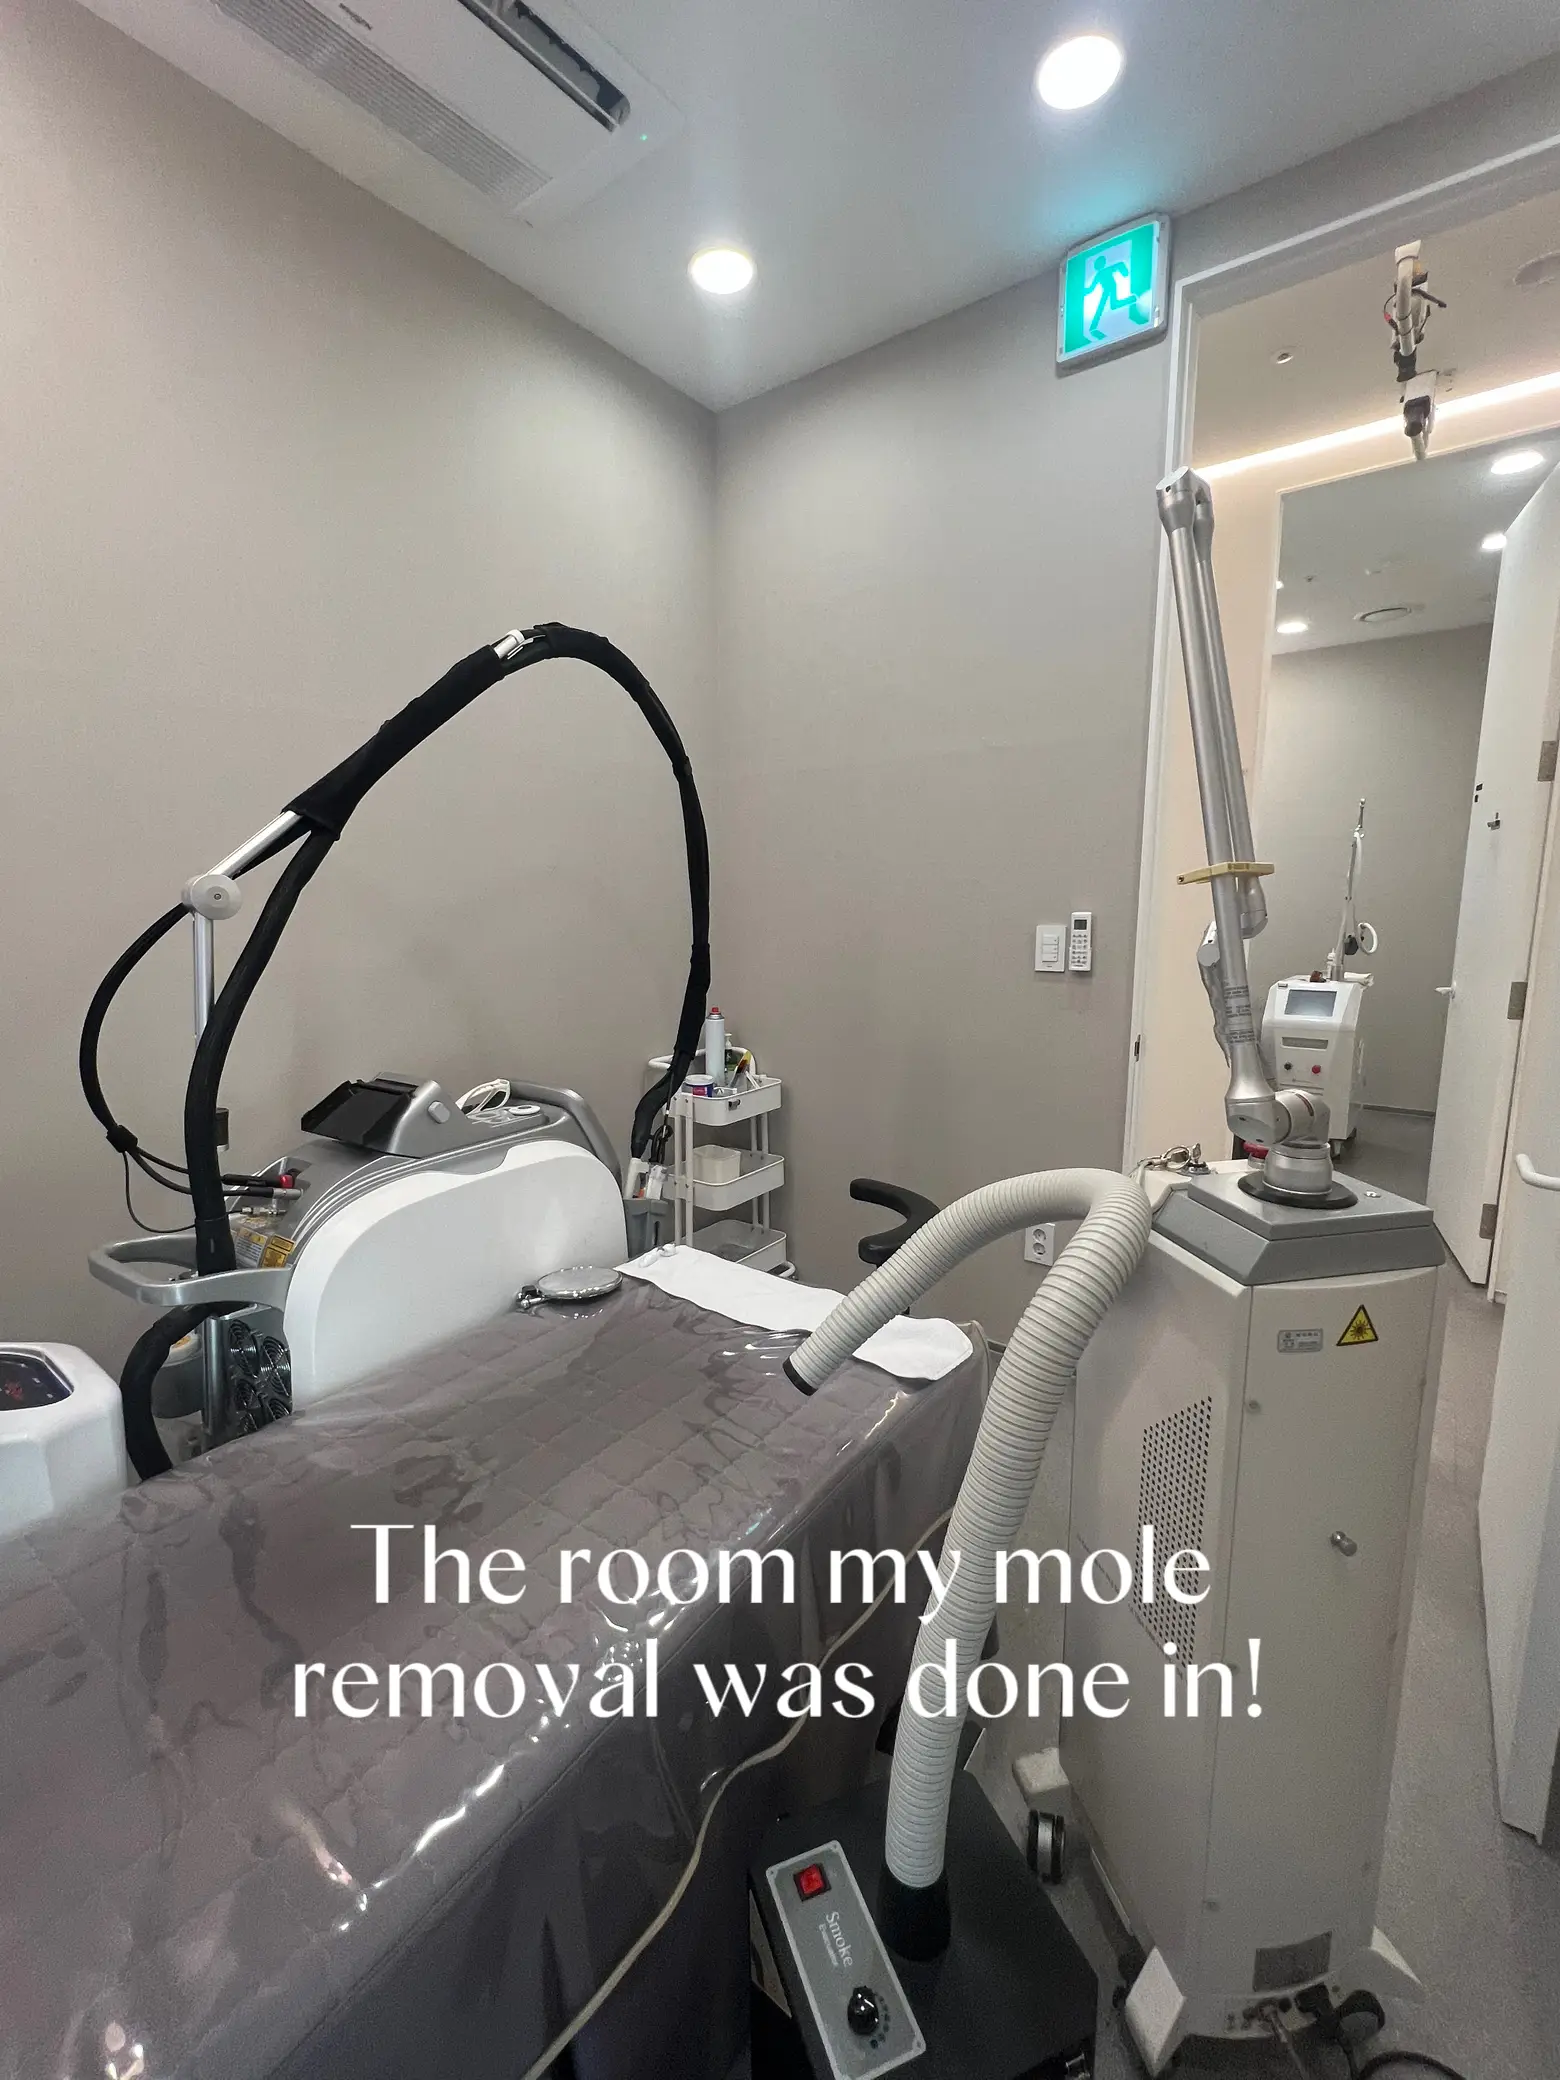 All you need to know about mole removal in Korea 🇰🇷's images(7)